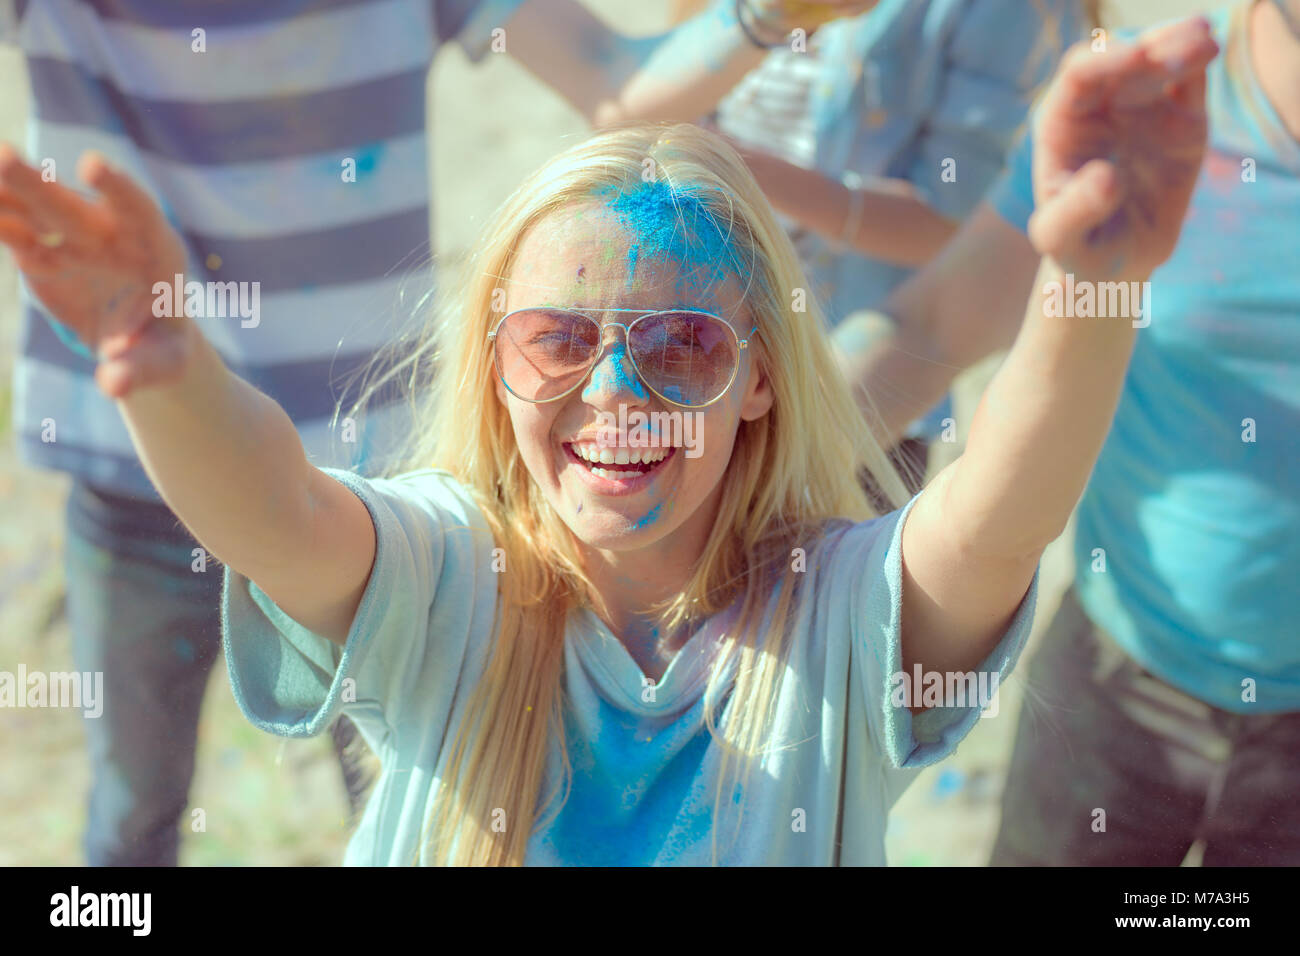 High Angle Shot of Blonde Girl Throwing Colorful Powder in the Crowd Amidst Hindu Holi Festival Celebrations. They Have Enormous Fun on this Sunny Day Stock Photo